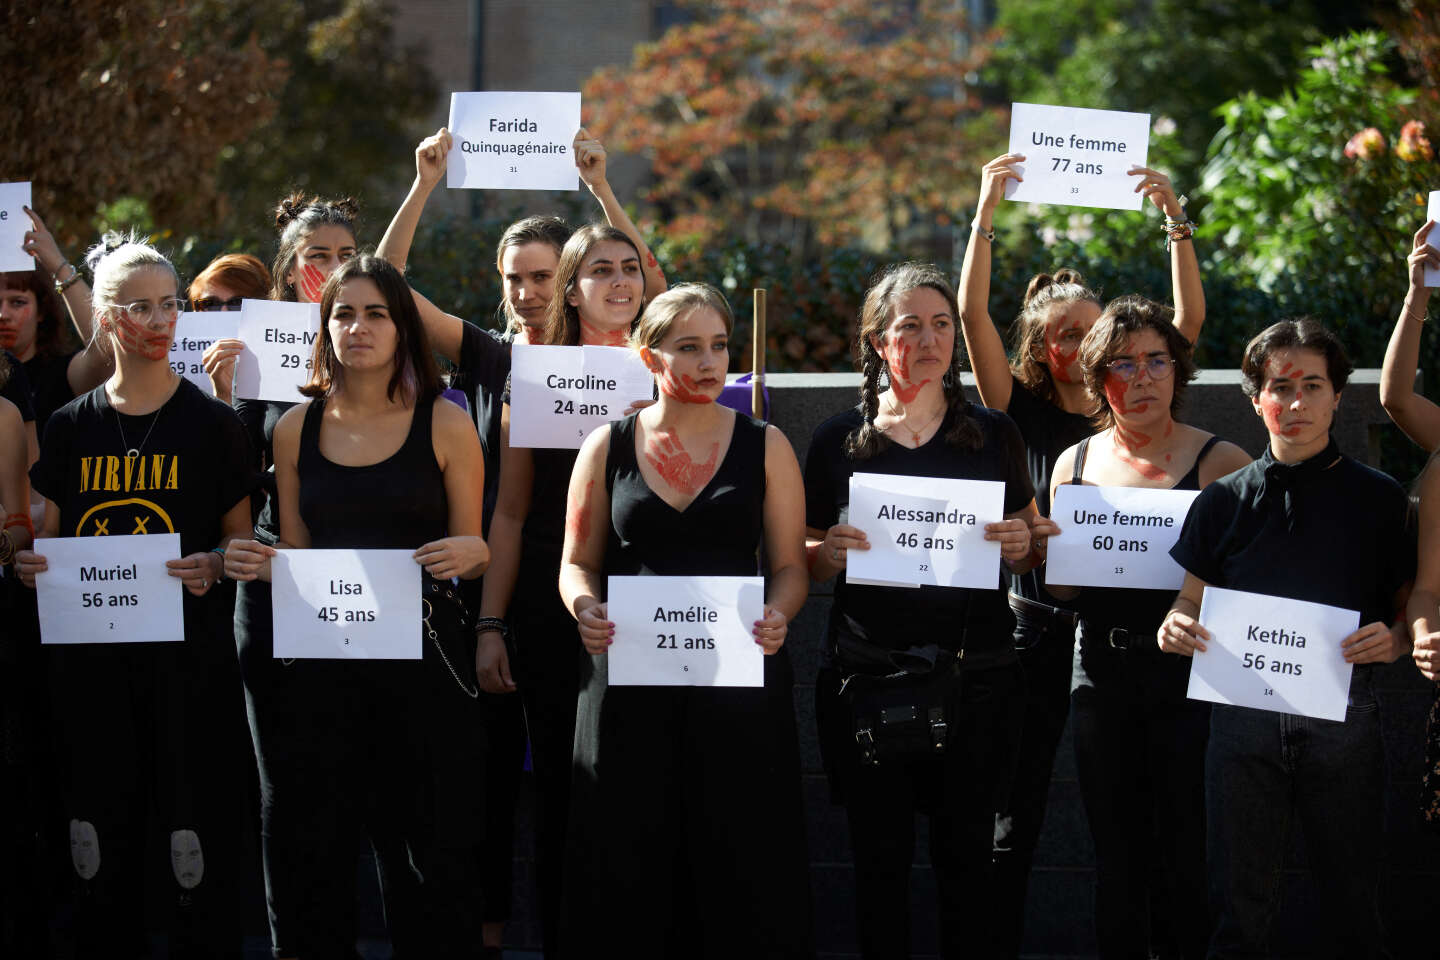 Protesters march in memory of 100 femicide victims killed in France this year